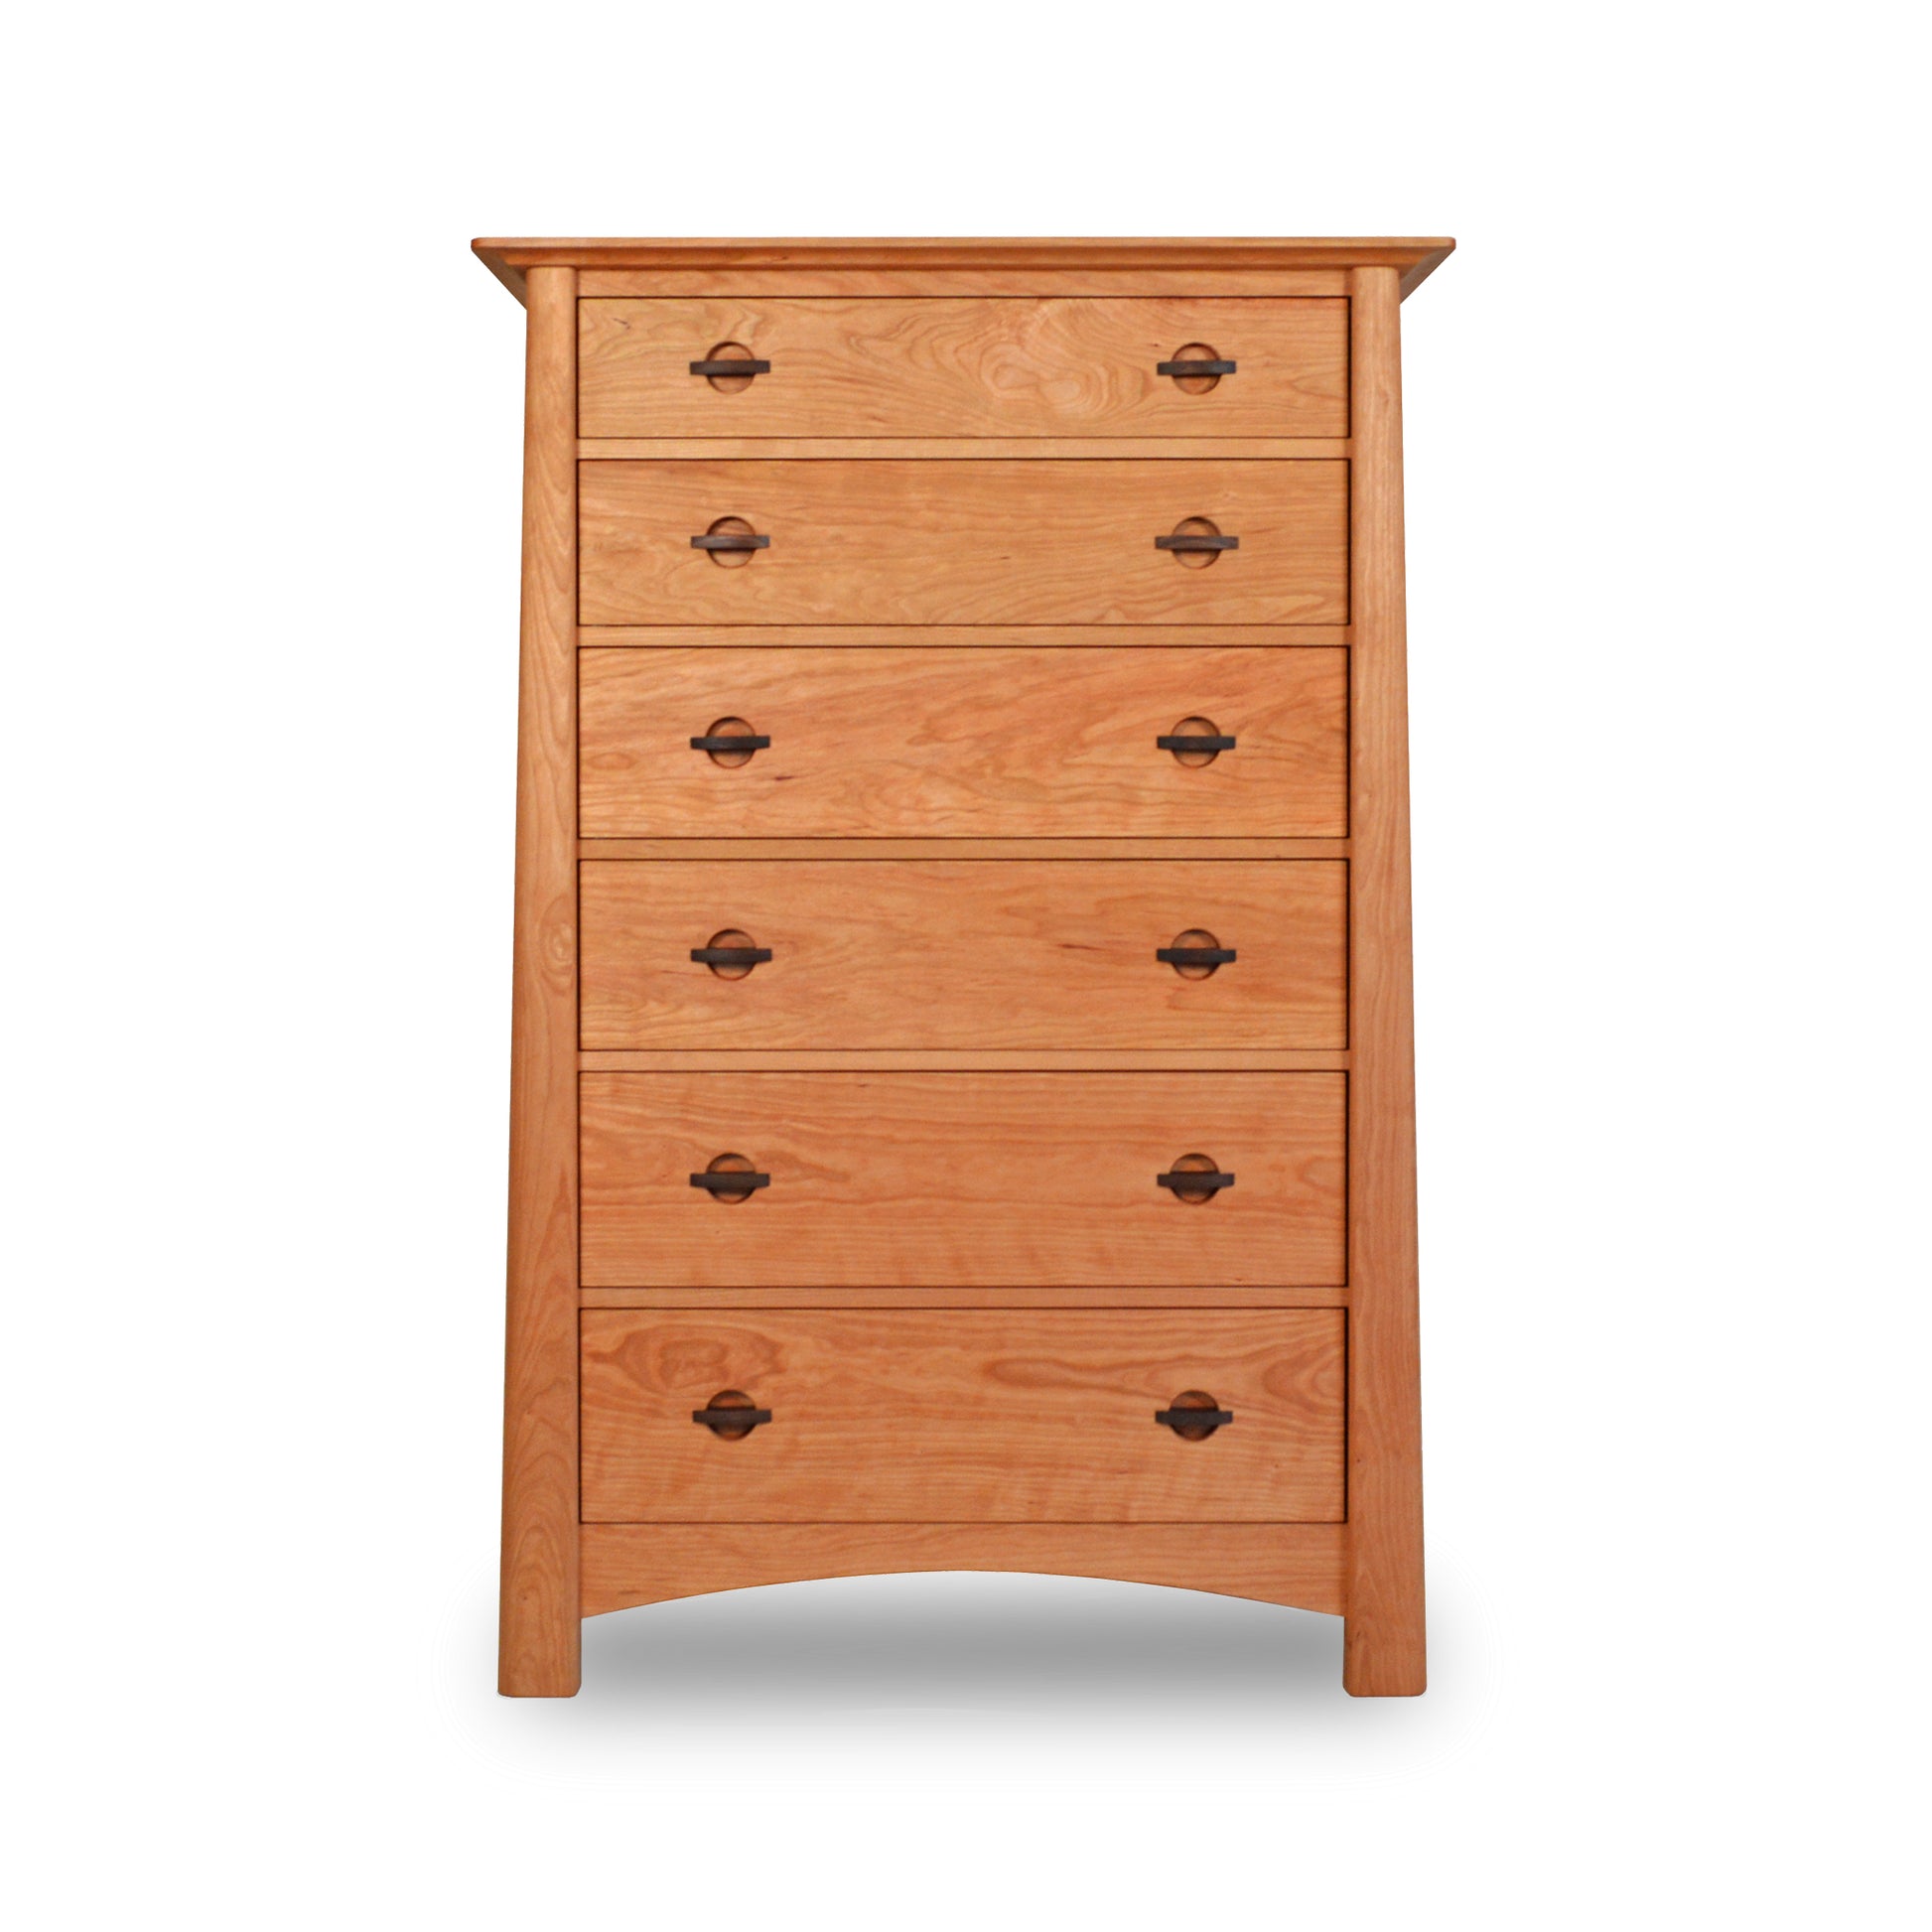 A tall Maple Corner Woodworks Cherry Moon 6-Drawer Chest made from eco-friendly hardwoods, each drawer fitted with two round handles, against a plain white background.